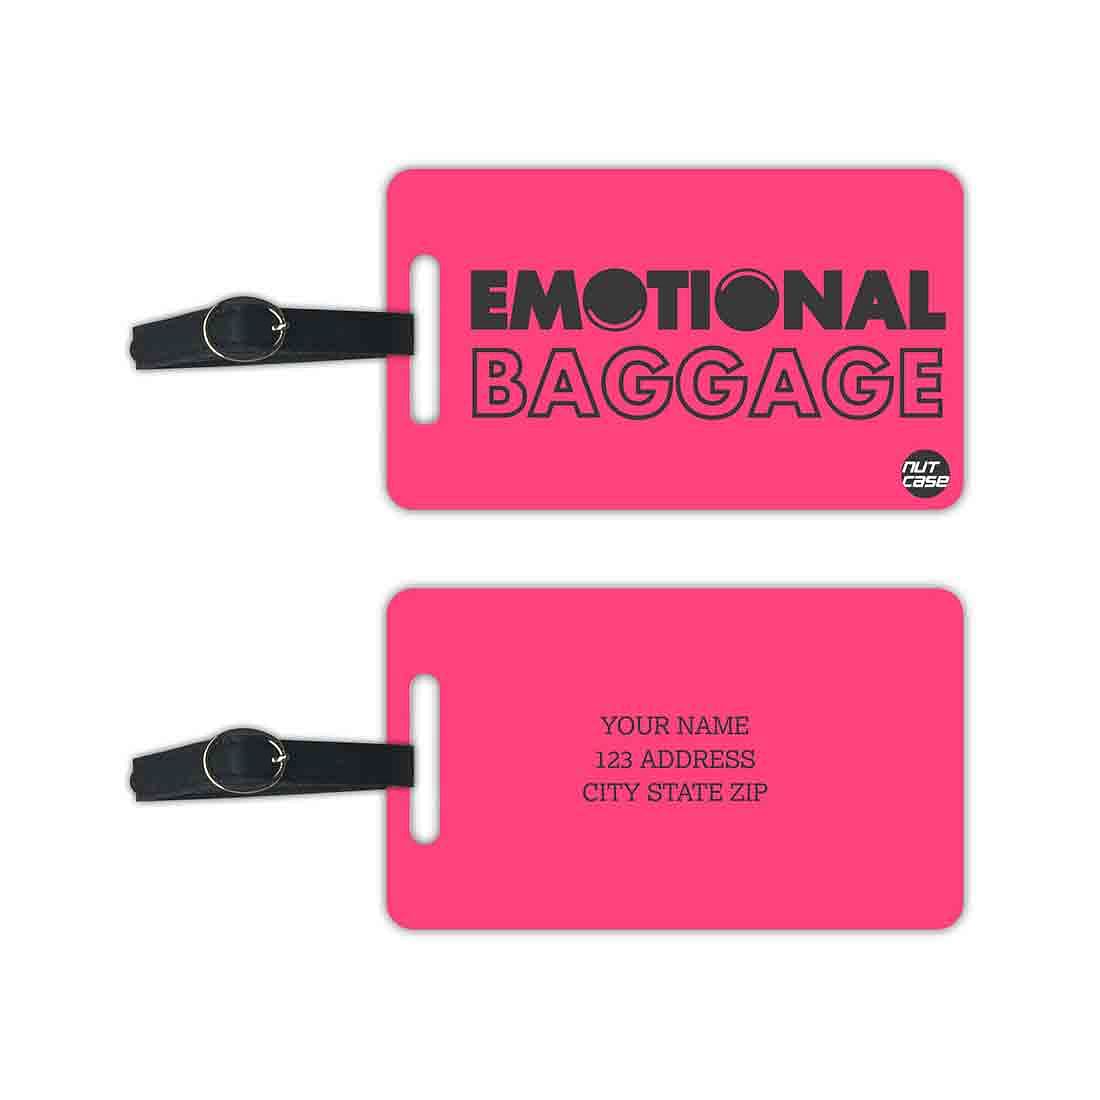 Customized Luggage Baggage Tag with Your Name - Set of 2 Nutcase